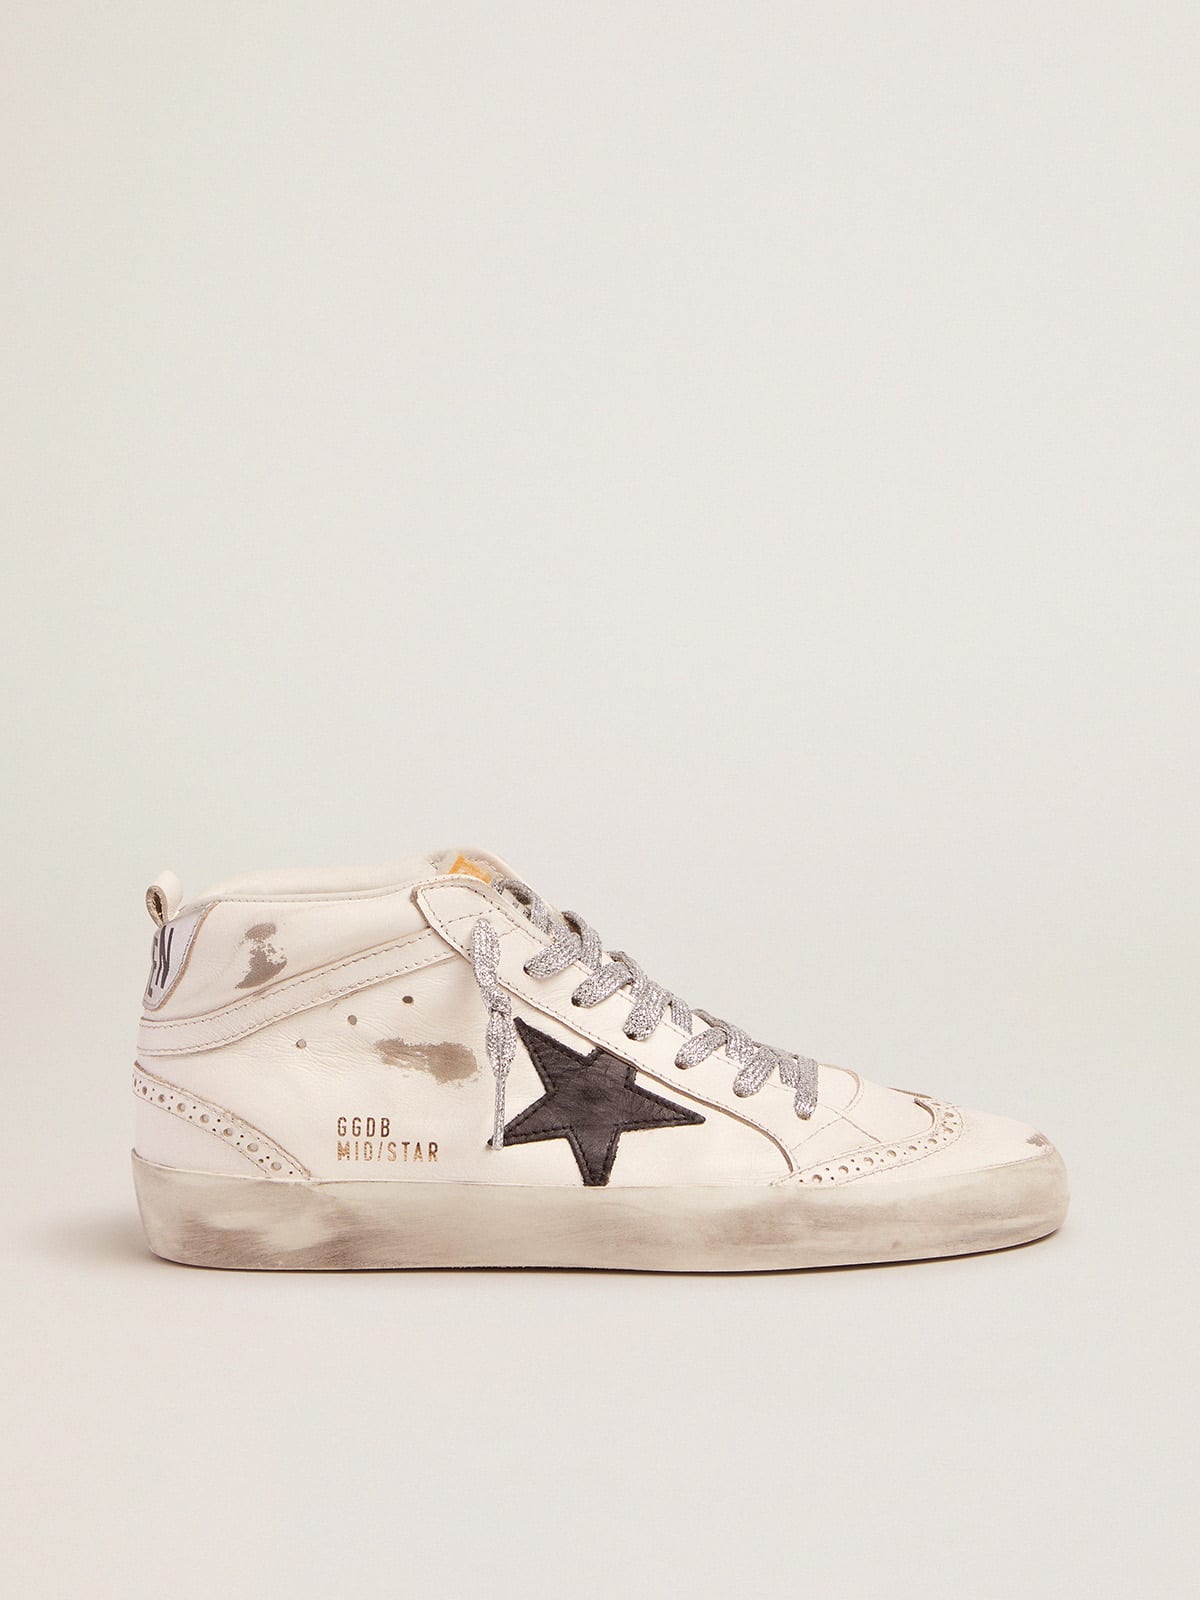 Mid-Star sneakers with laminated heel tab and glittery laces